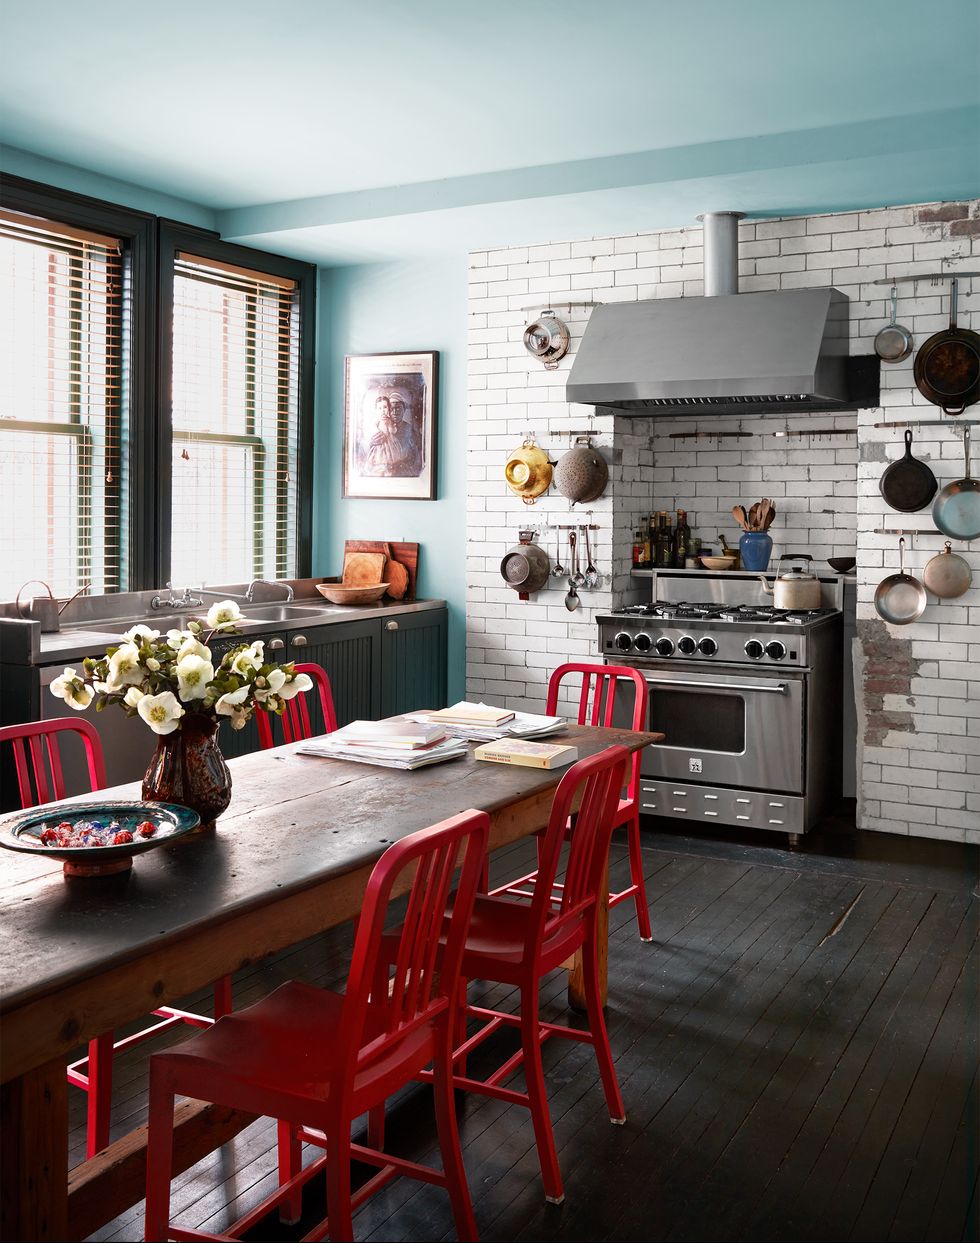 a kitchen has a long antique wood table with red chairs, a dark wood floor, light blue walls and ceiling, subway tiles surrounding a stove and pots and colanders hanging on both sides of it